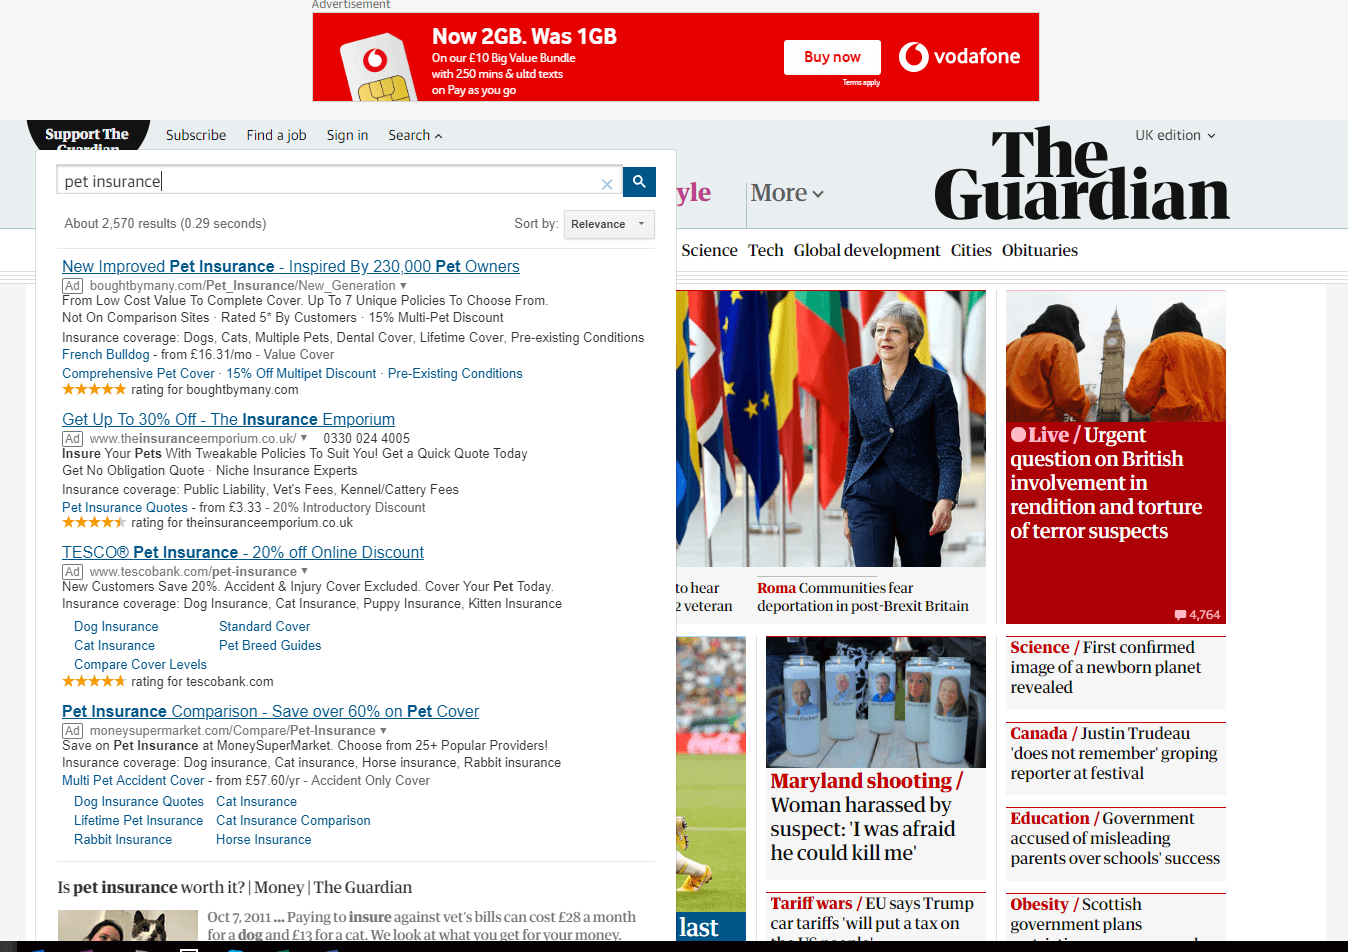 Google Search Partners Ads on The Guardian